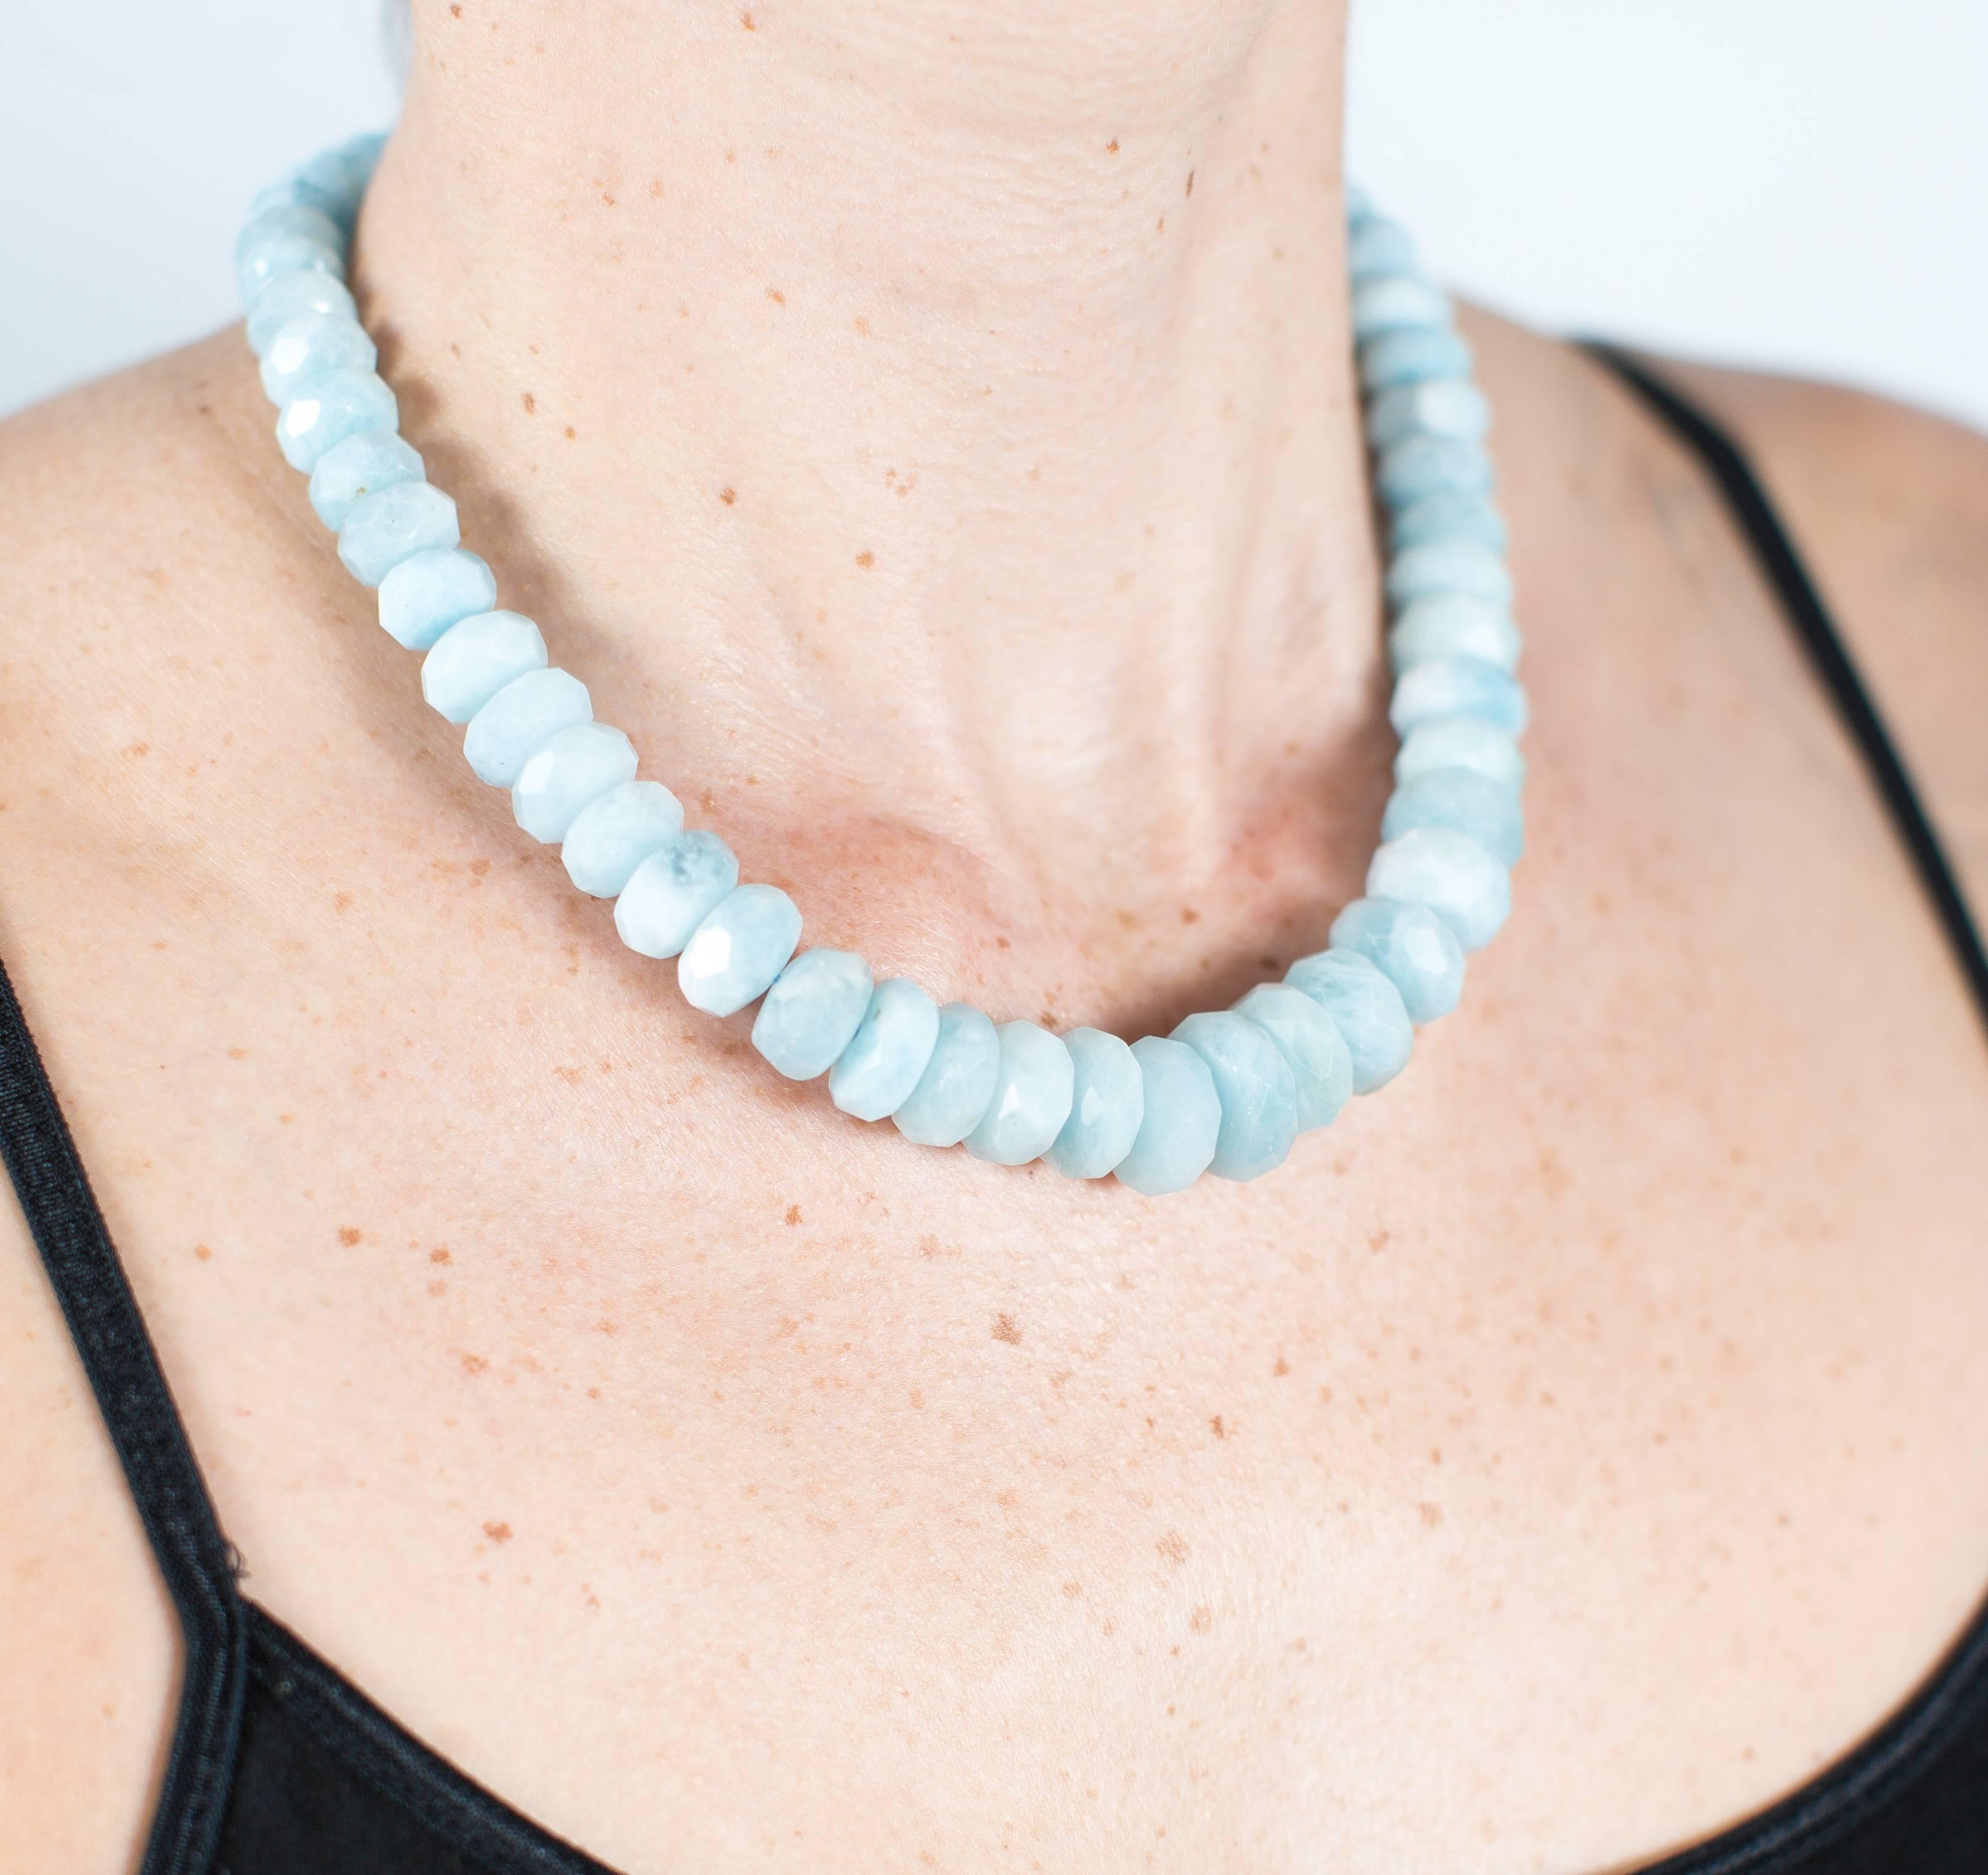 Custom made necklace of Faceted Graduated Rondels (8-17mm)) of Sparkly Bright Aquamarine. Although these gemstones are opaque they are definitely sea blue aquamarine and a very desirable color. The choker length of 17 inches is a delightful way to